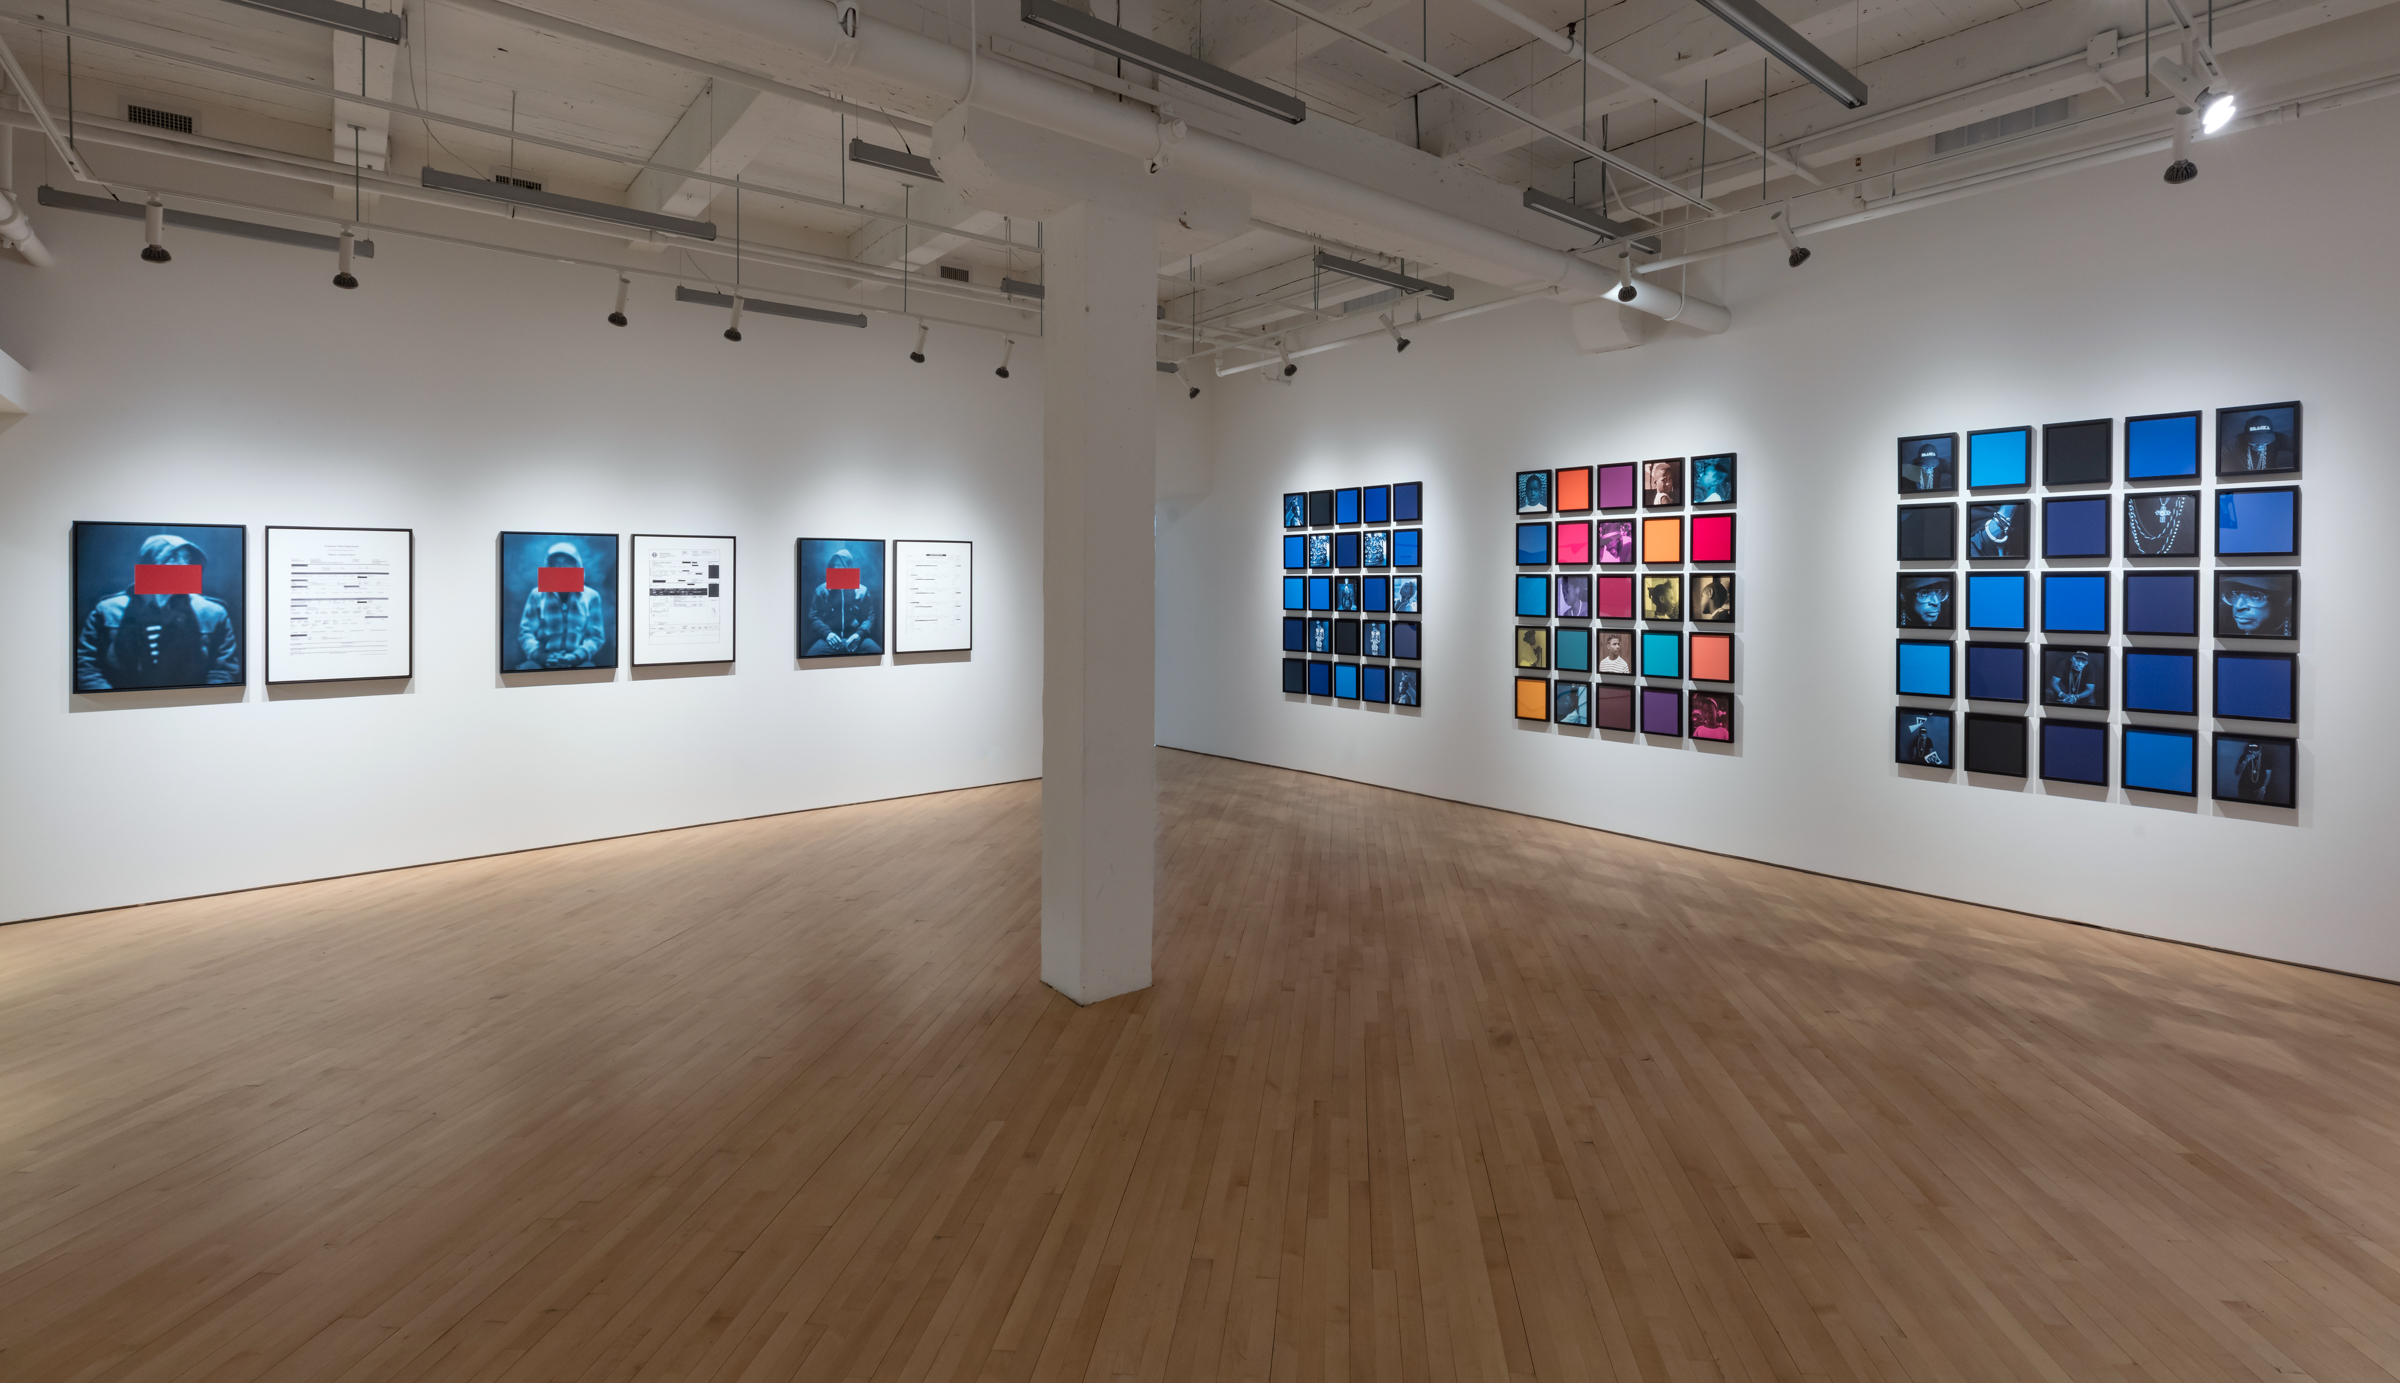     Carrie Mae Weems, Installation view of Blending the Blues, CONTACT Gallery, Toronto, May 1 &#8211; July 27, 2019. Photo: Toni Hafkenscheid. Courtesy CONTACT, the
artist, and Jack Shainman Gallery, New York, NY.

